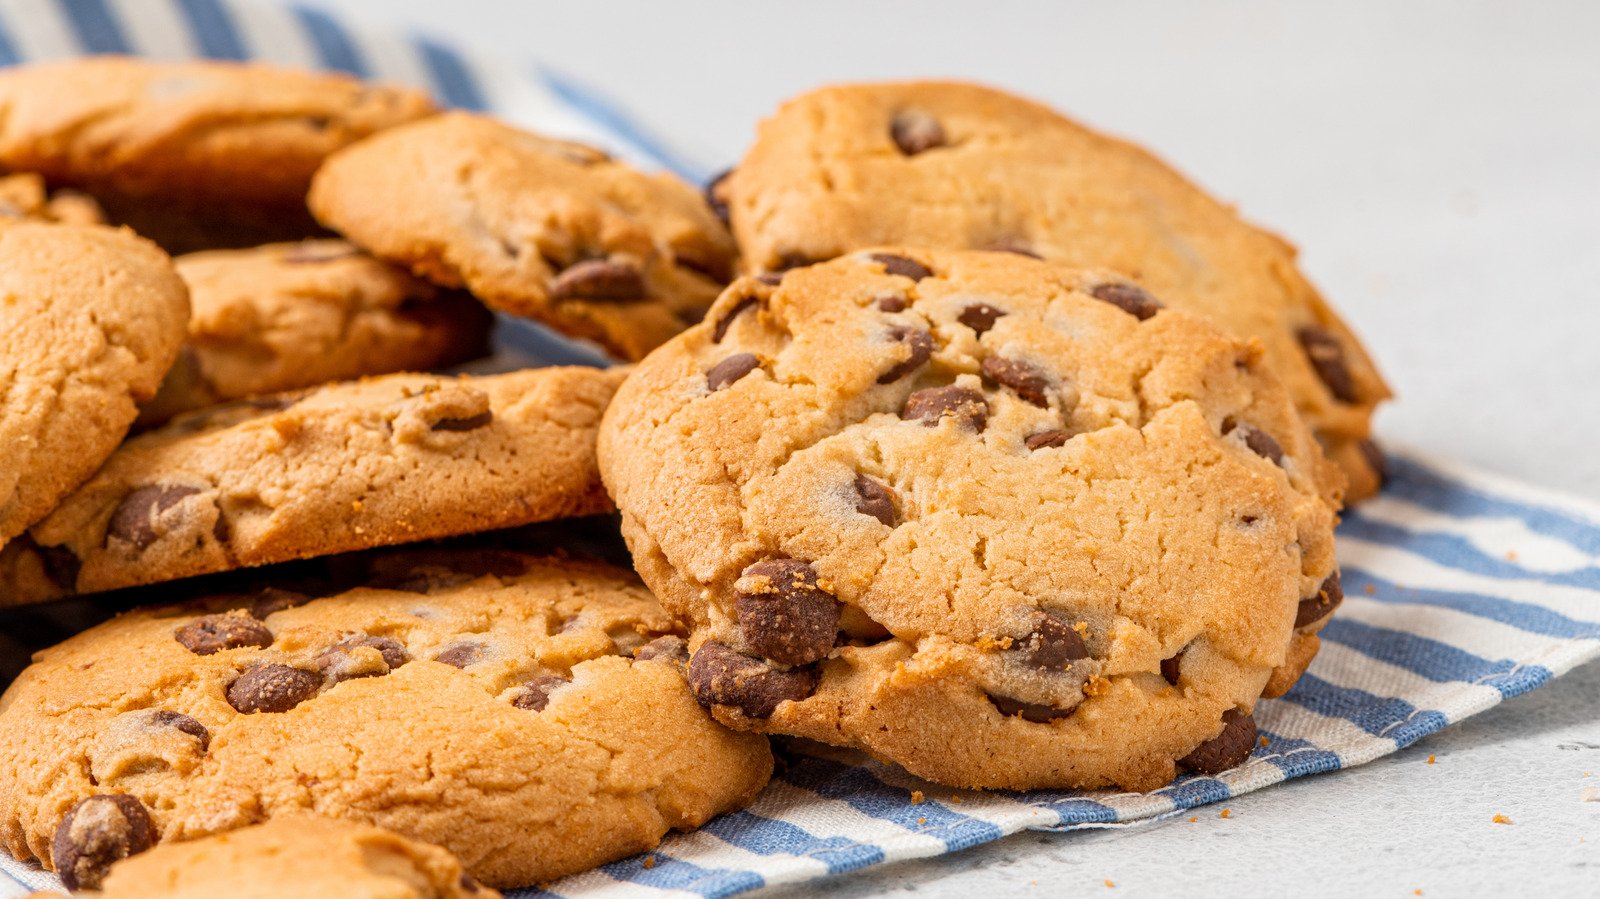 Fast Food Chocolate Chip Cookies Ranked From Worst To Best - Mashed